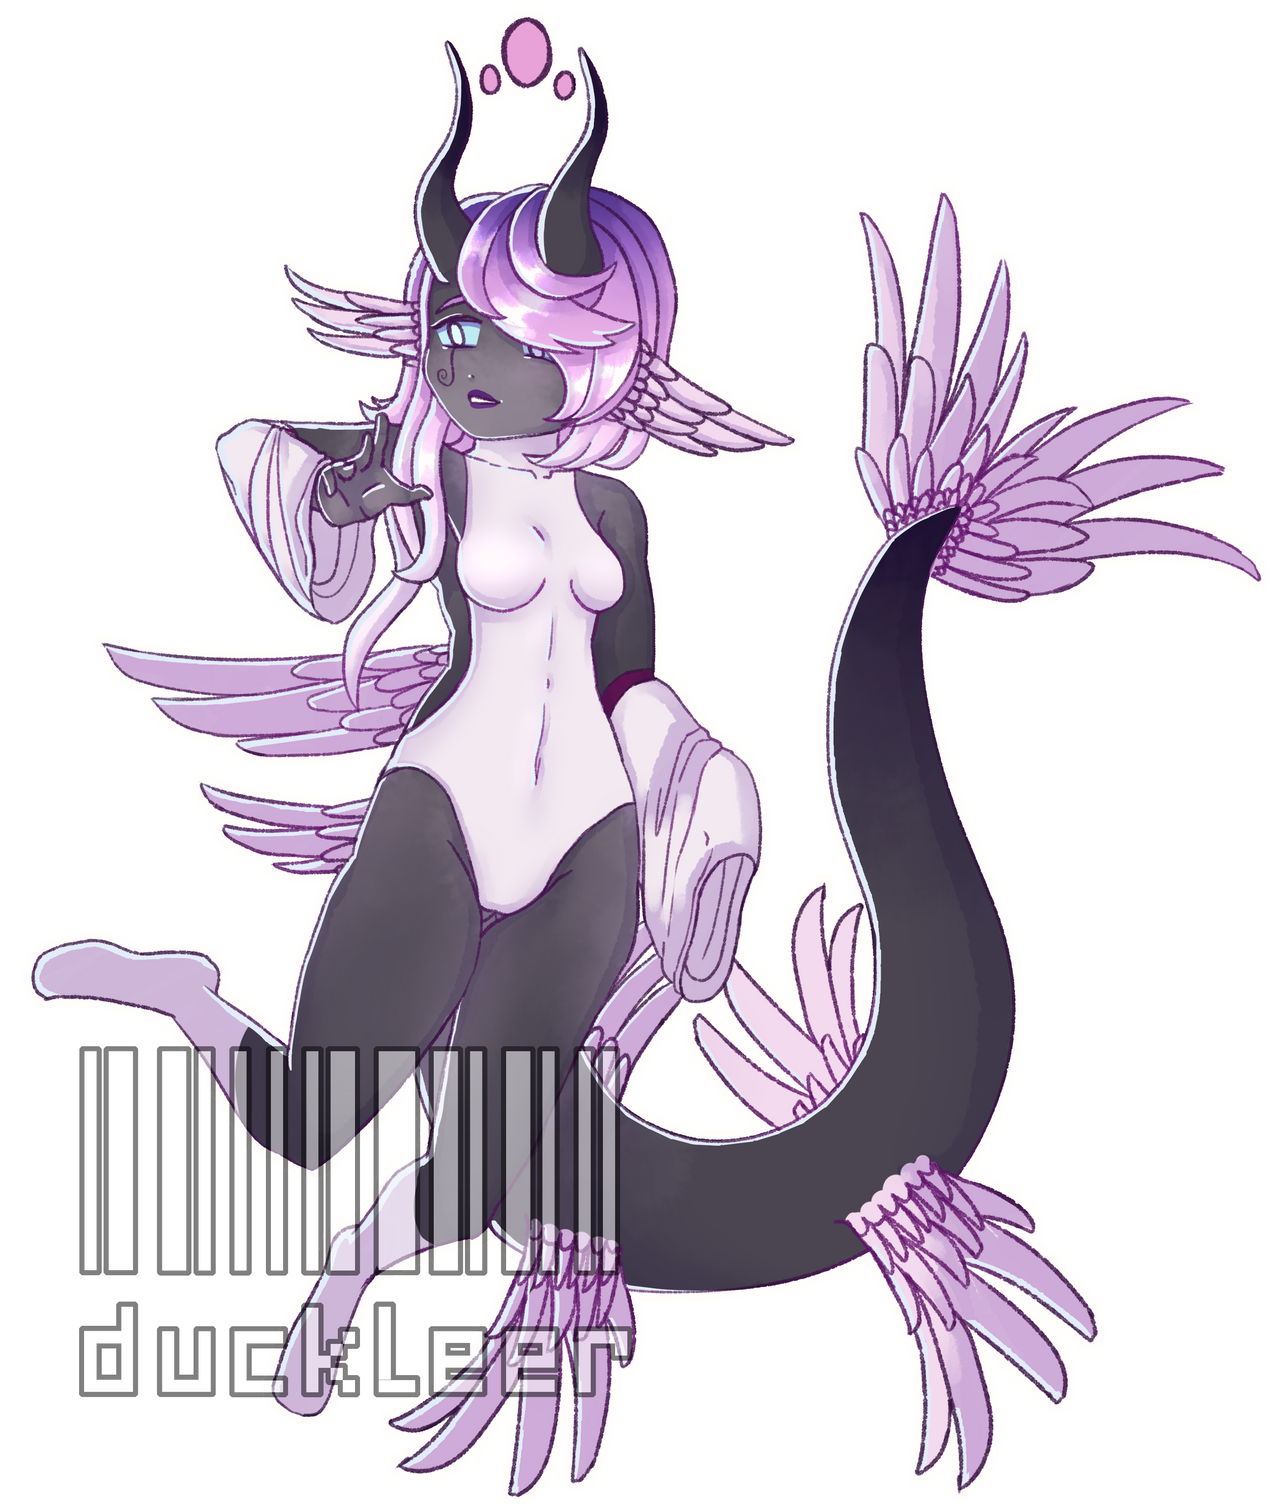 for_suya_by_duckleer_ddgfqlv-fullview.png